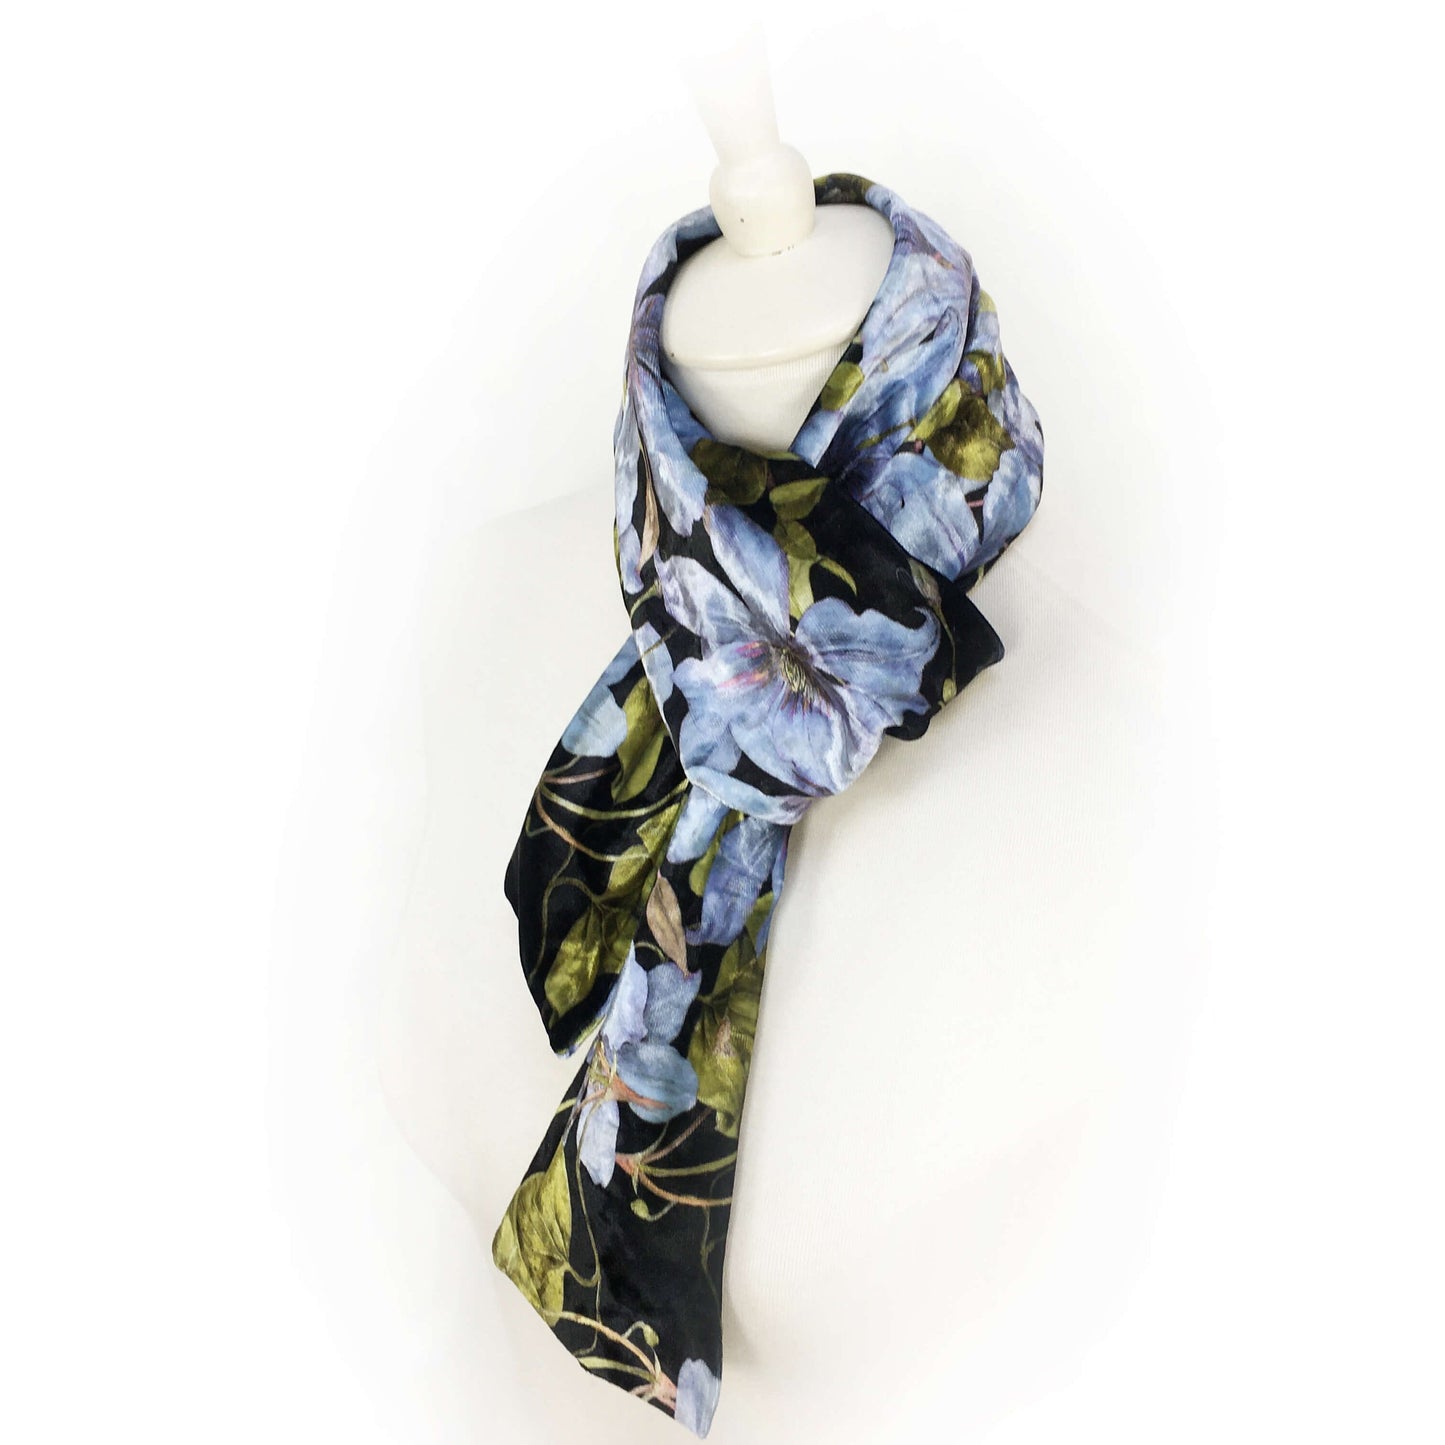 Denim Blue Clematis Velour Scarf, Womans Scarf, All season, Luminous Scarf, handmade artist scarf, Wear all day or evening